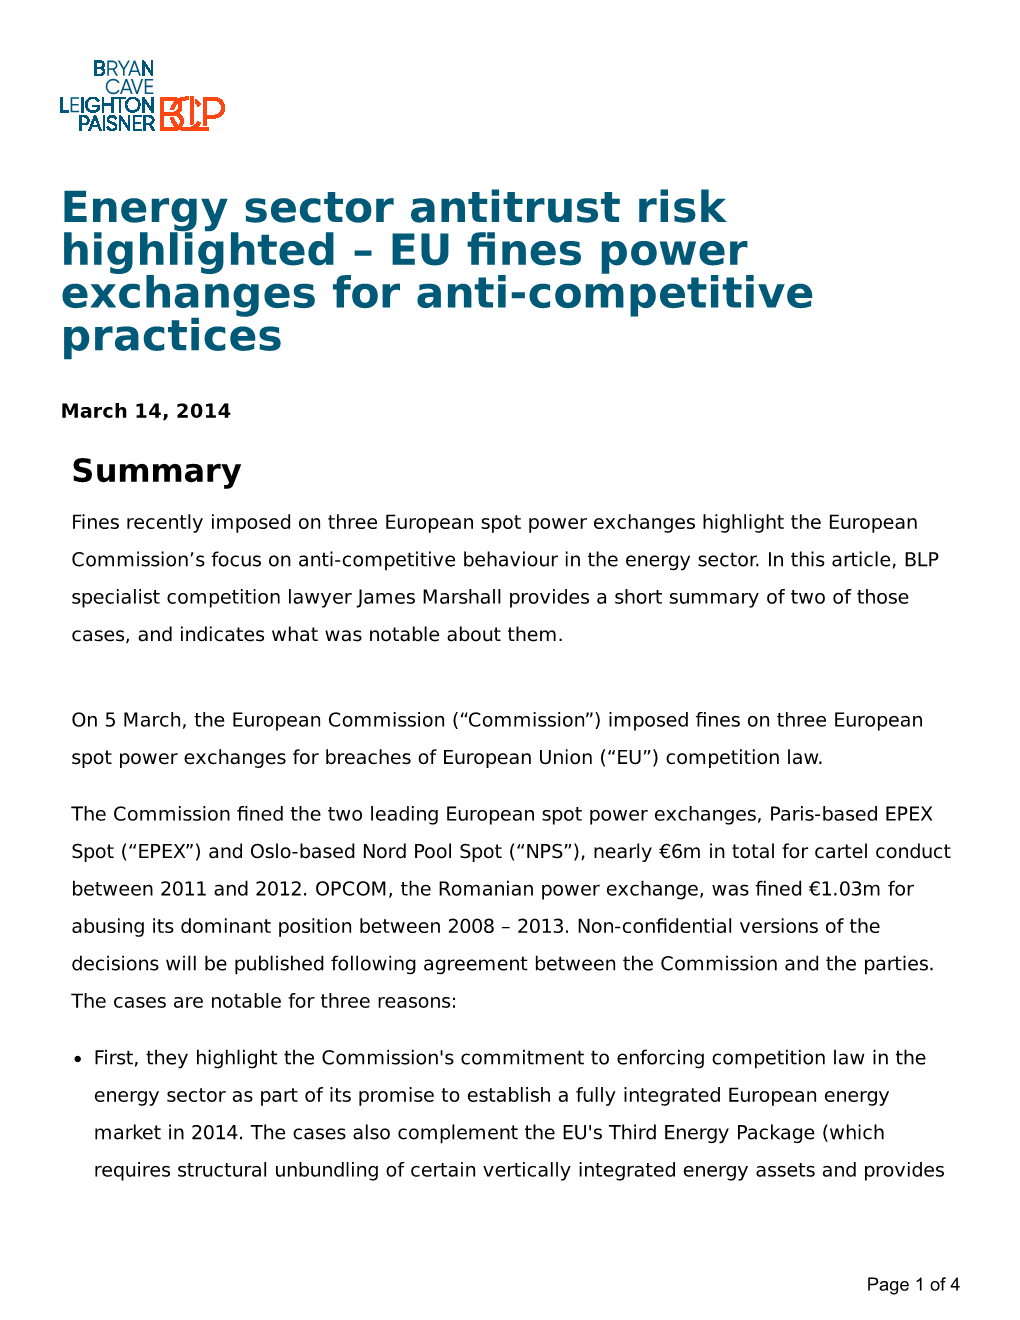 Energy Sector Antitrust Risk Highlighted – EU Fines Power Exchanges for Anti-Competitive Practices